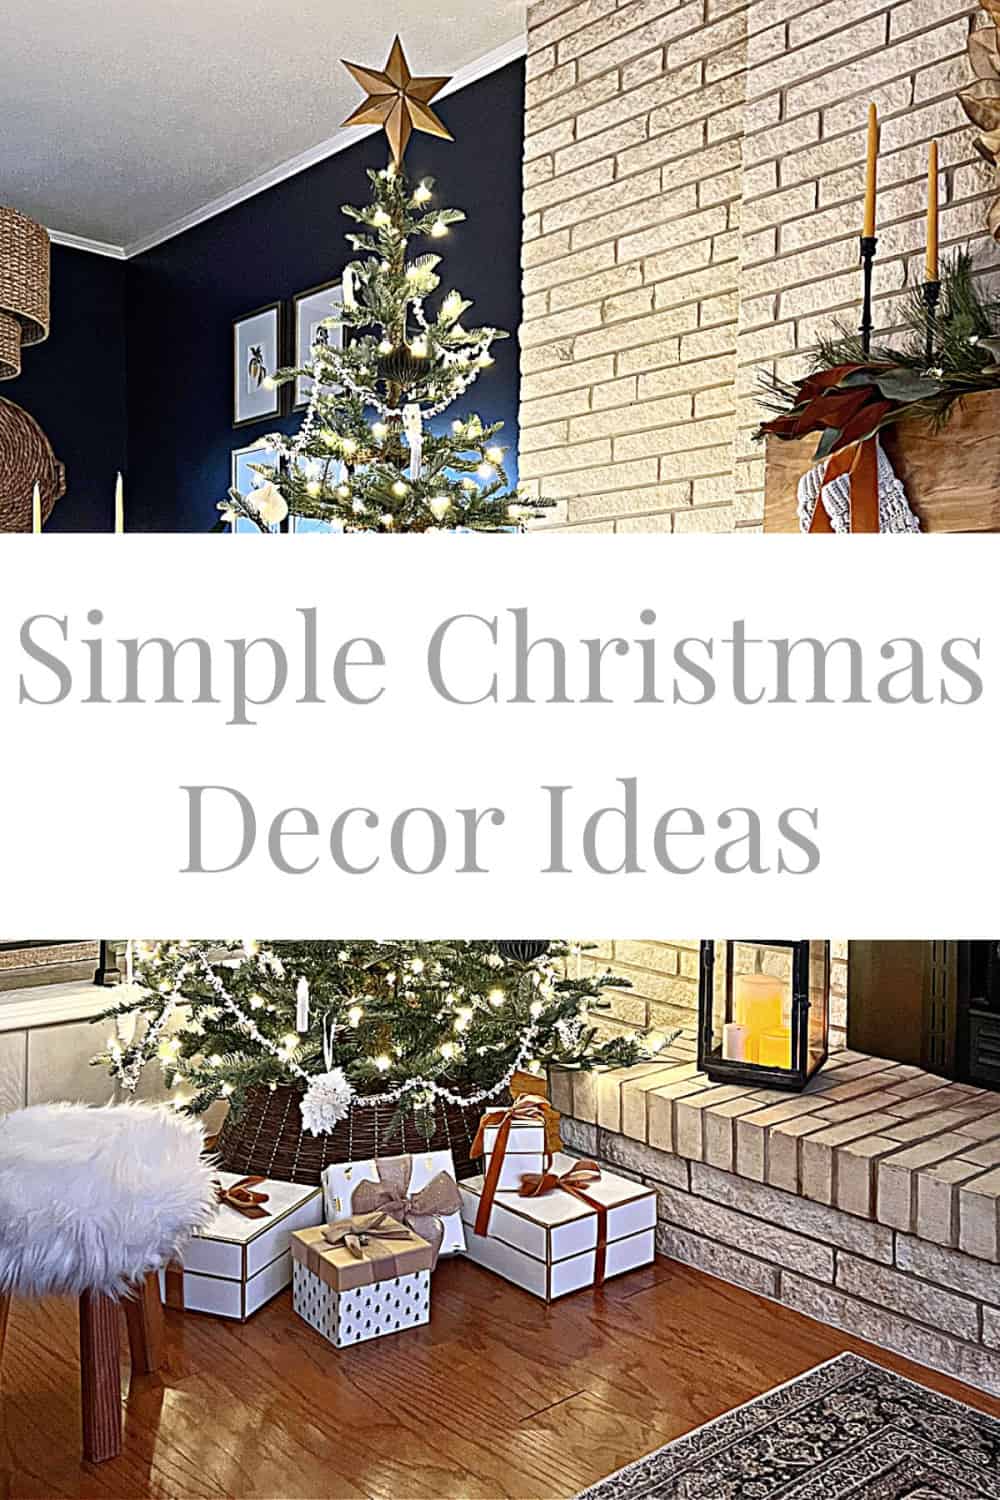 decorated Christmas tree in living room and large graphic